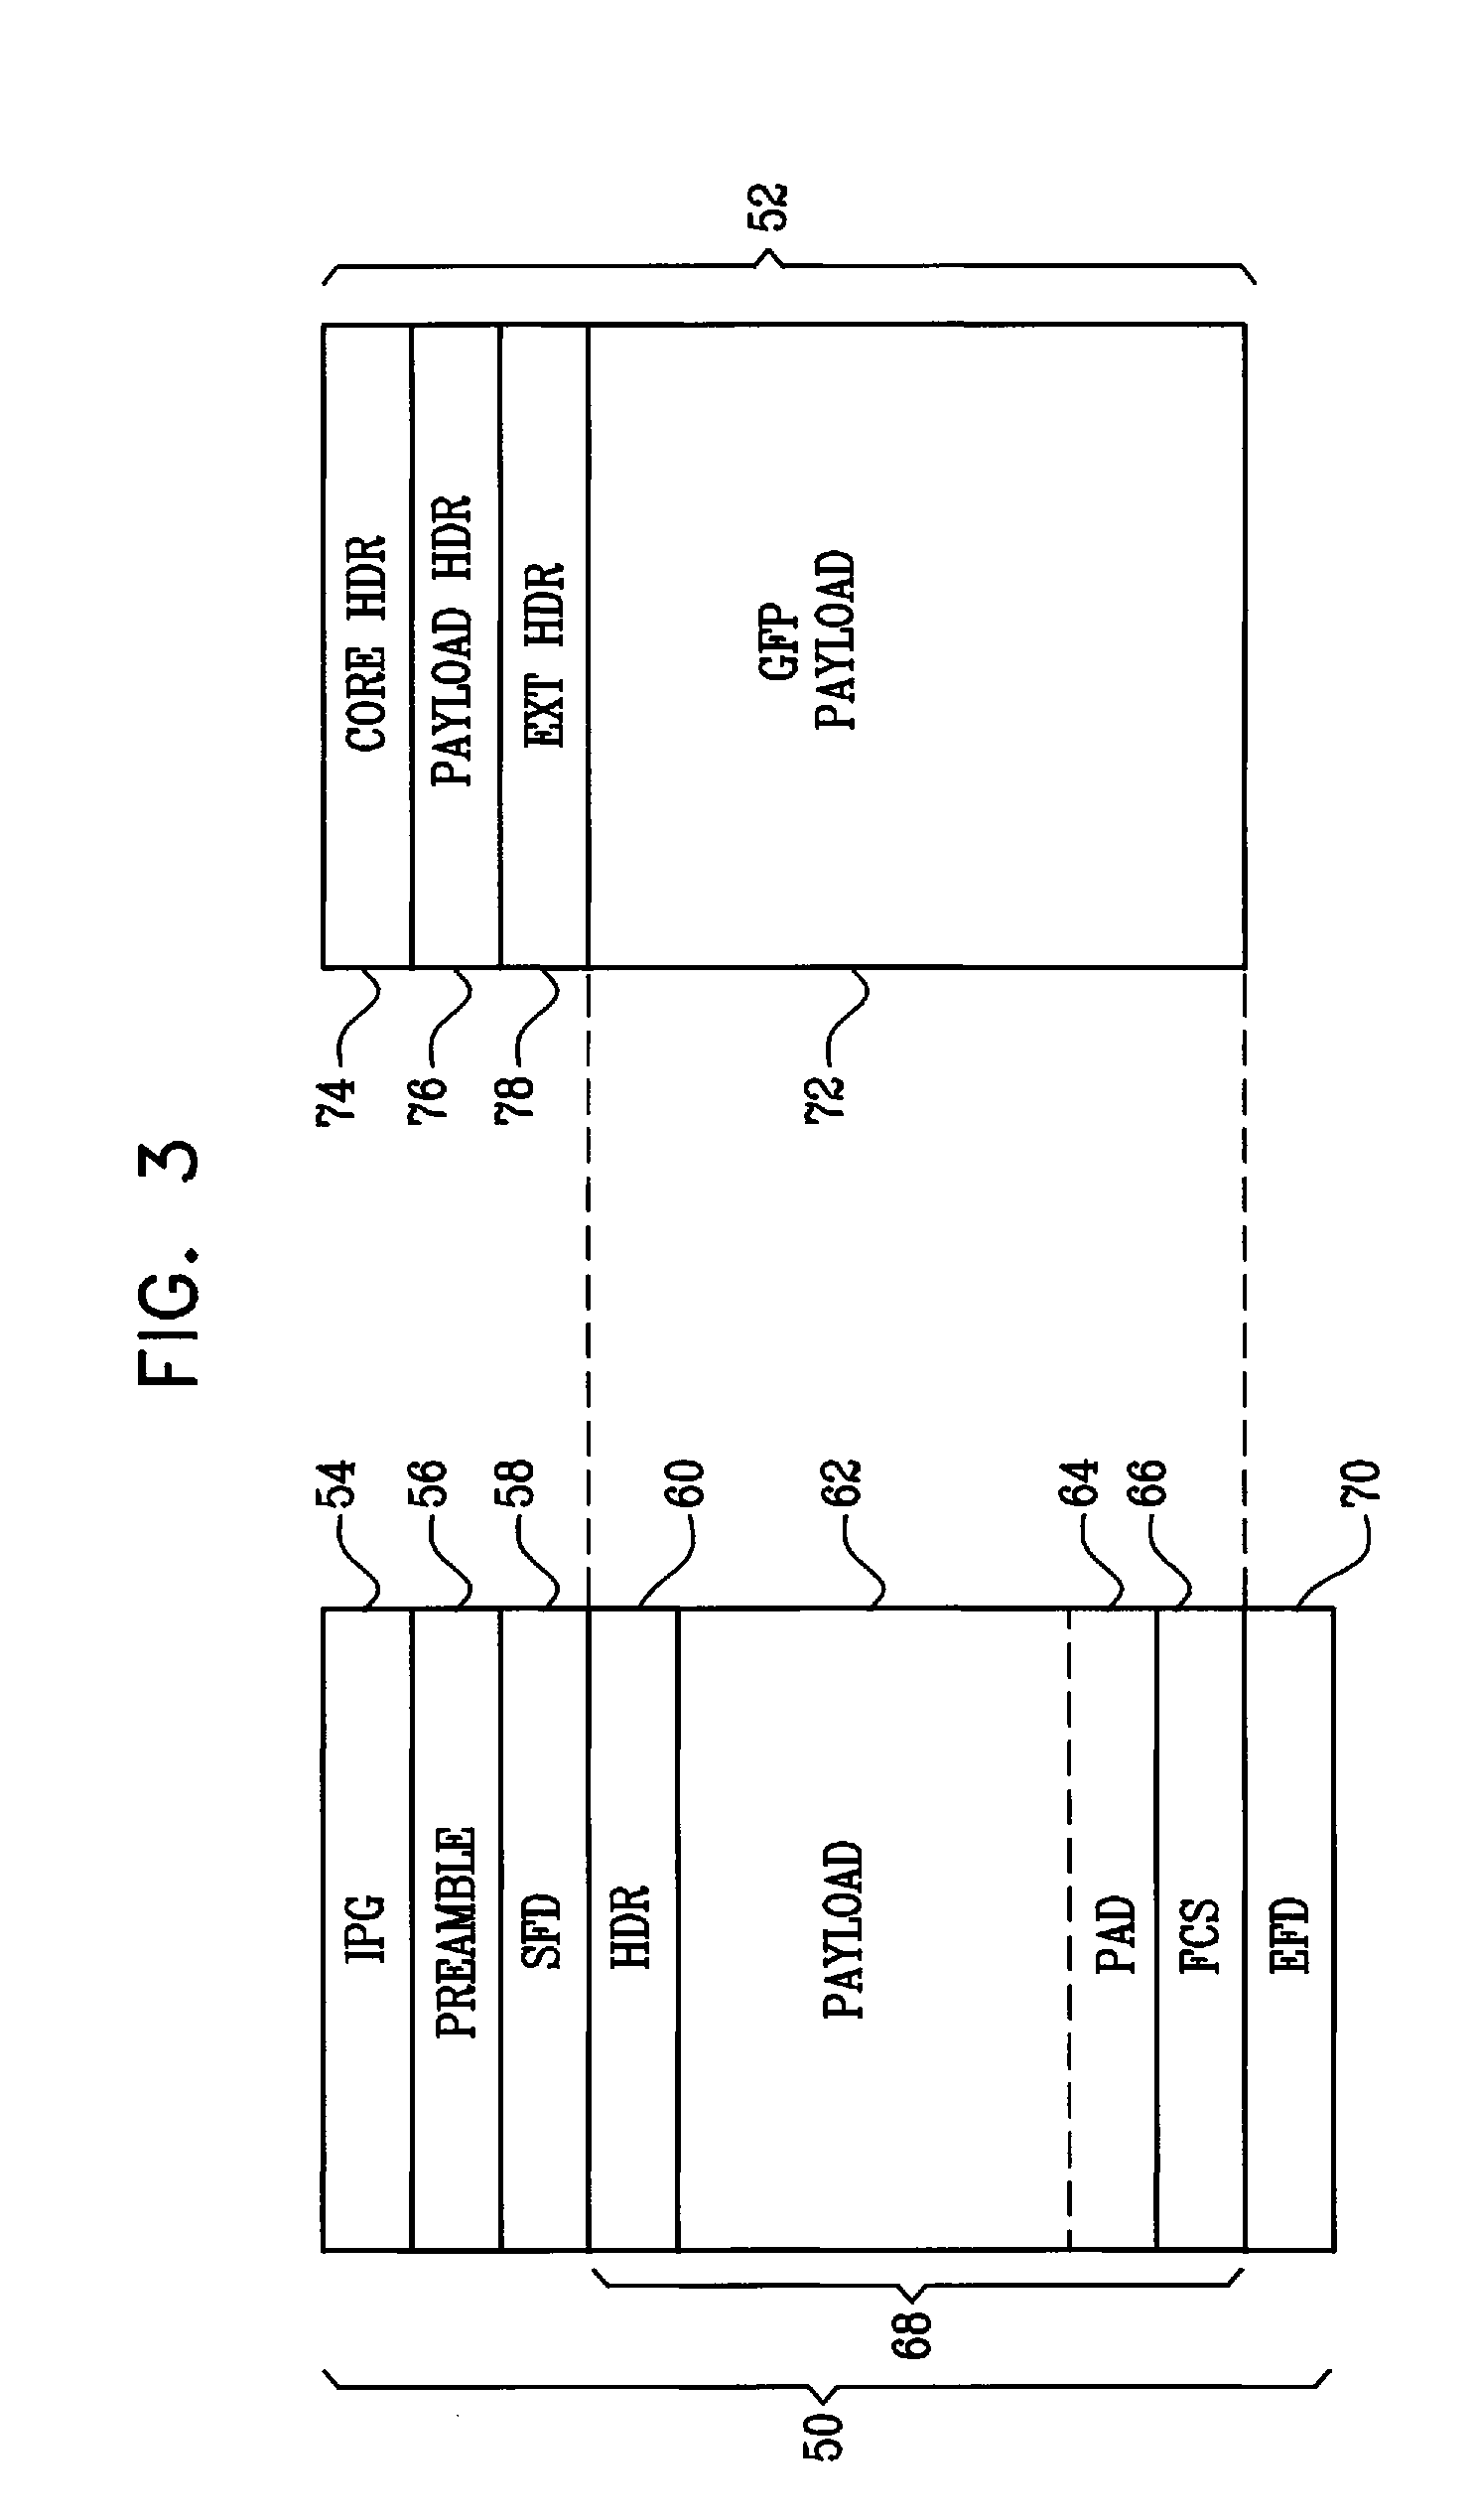 Interface between a synchronous network and high-speed ethernet